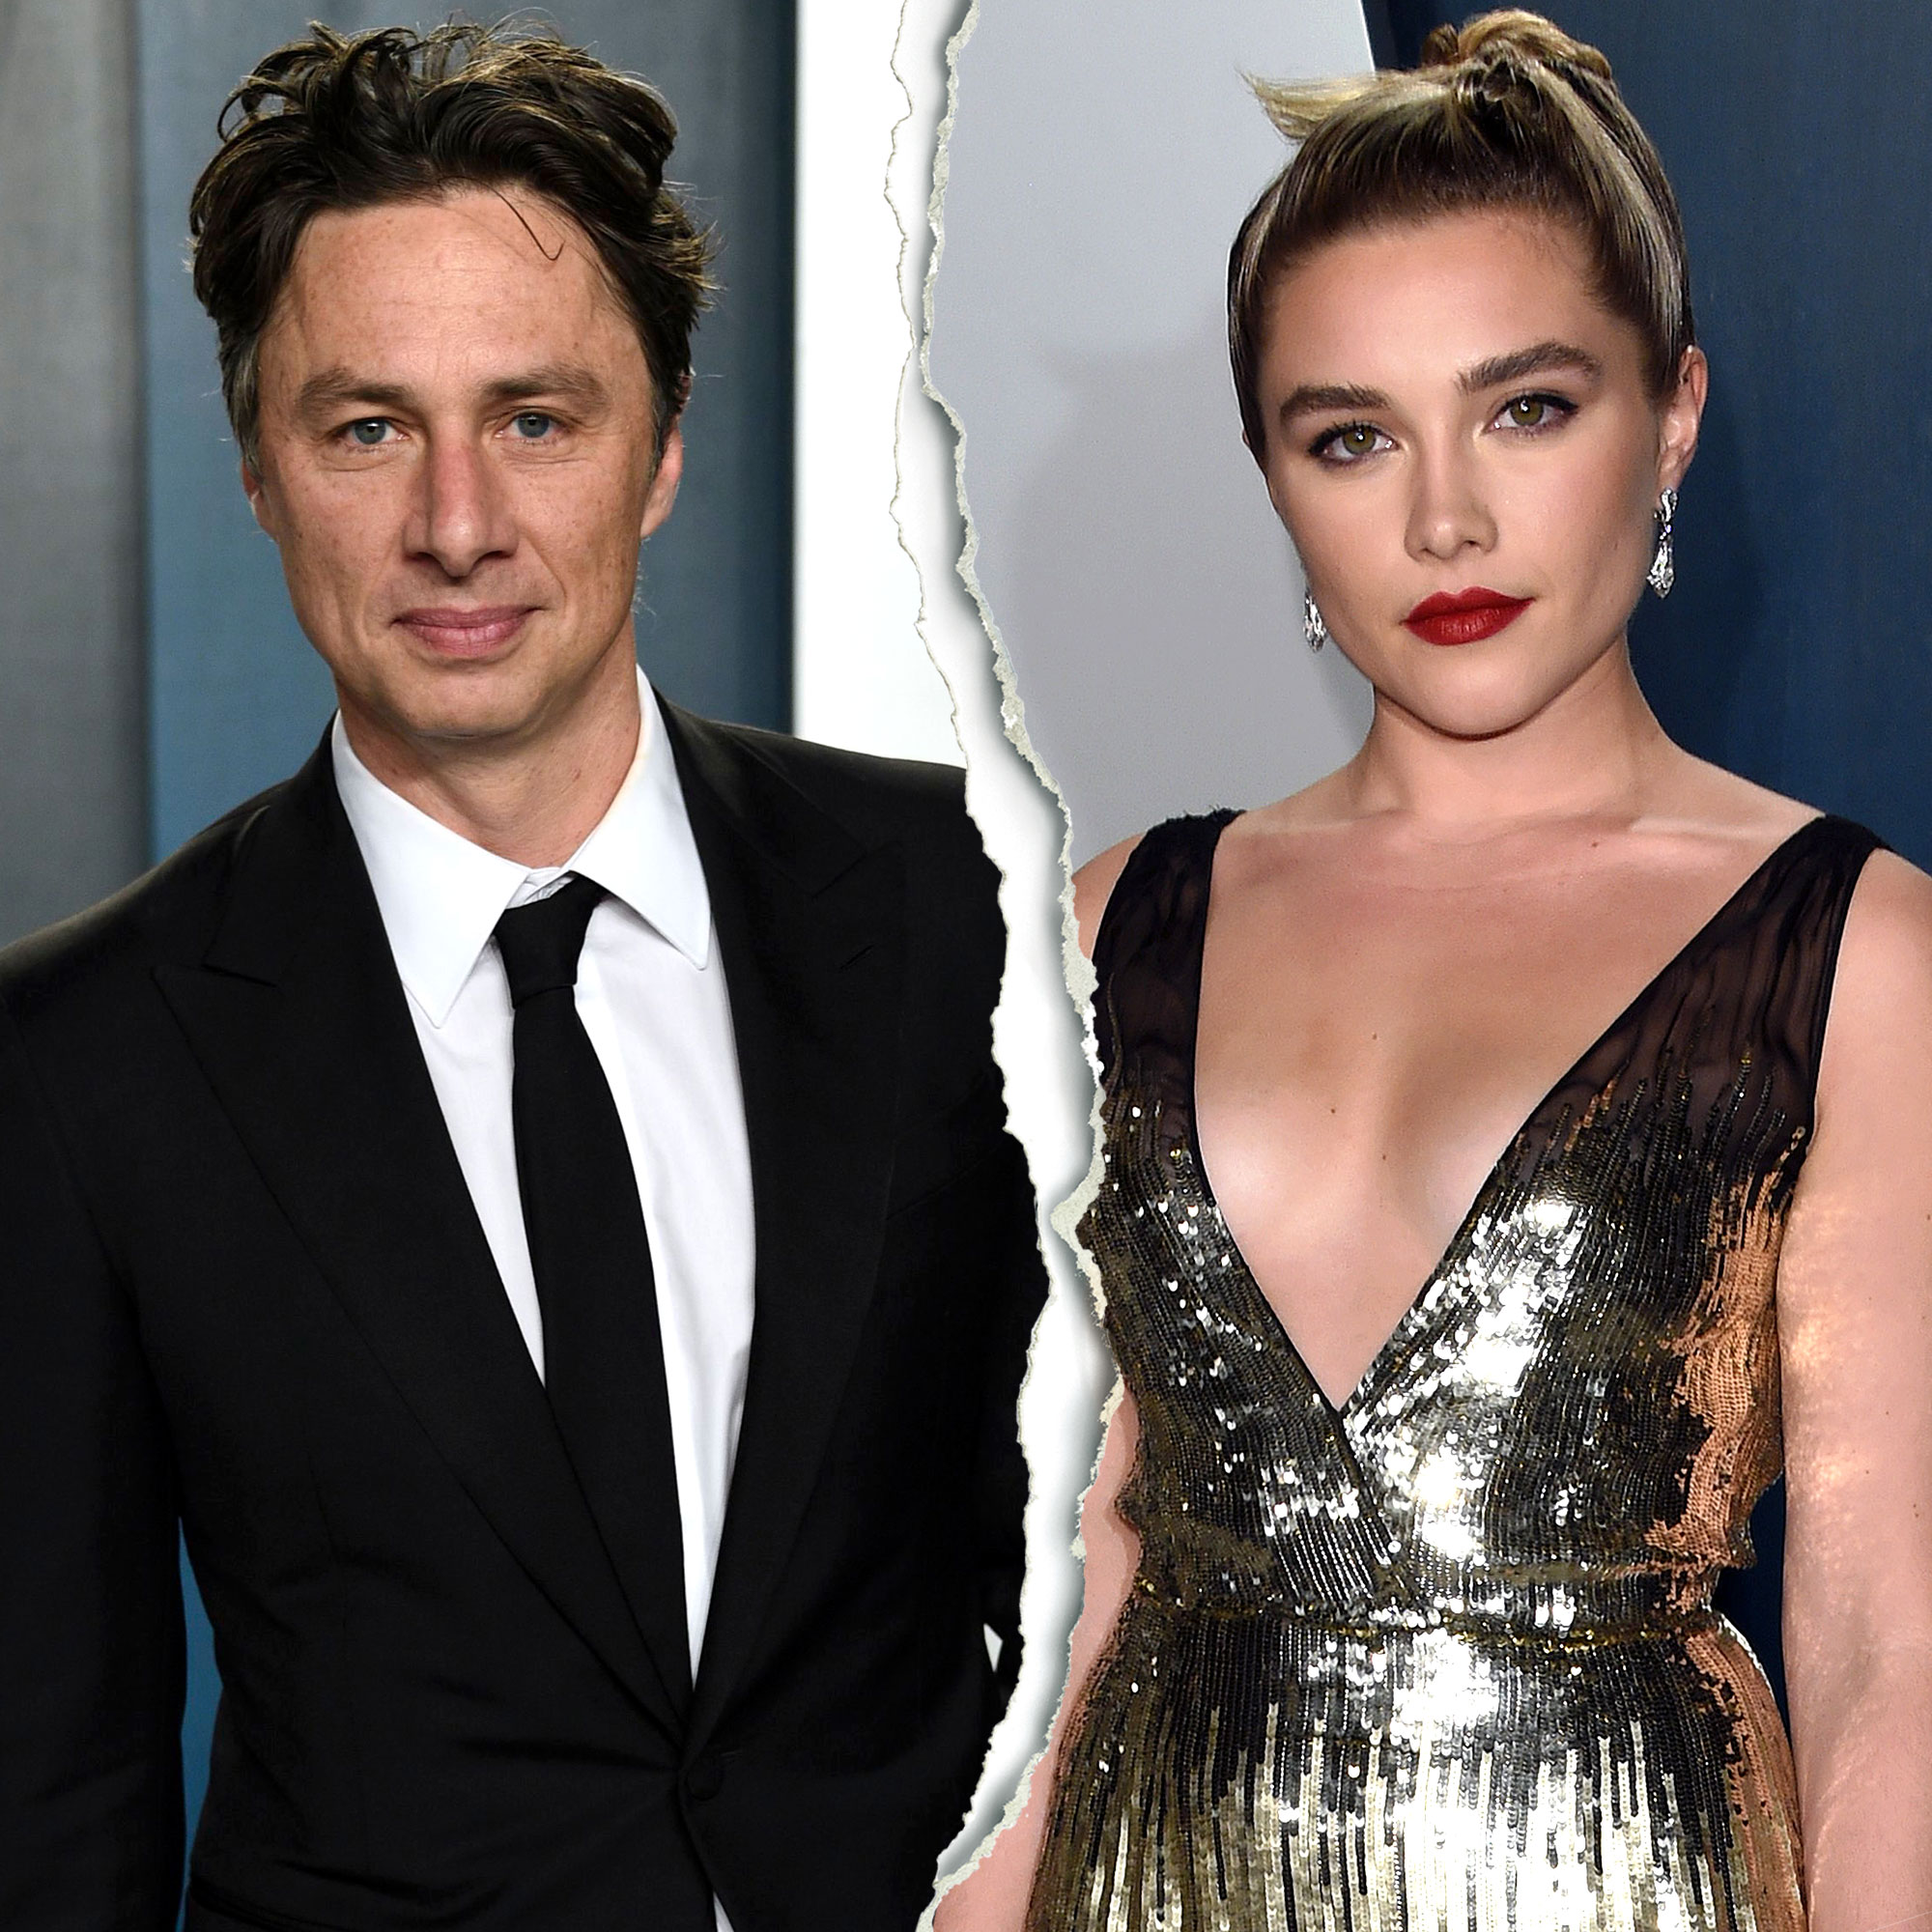 Florence Pugh, Zach Braff Split After 3 Years of Dating pic